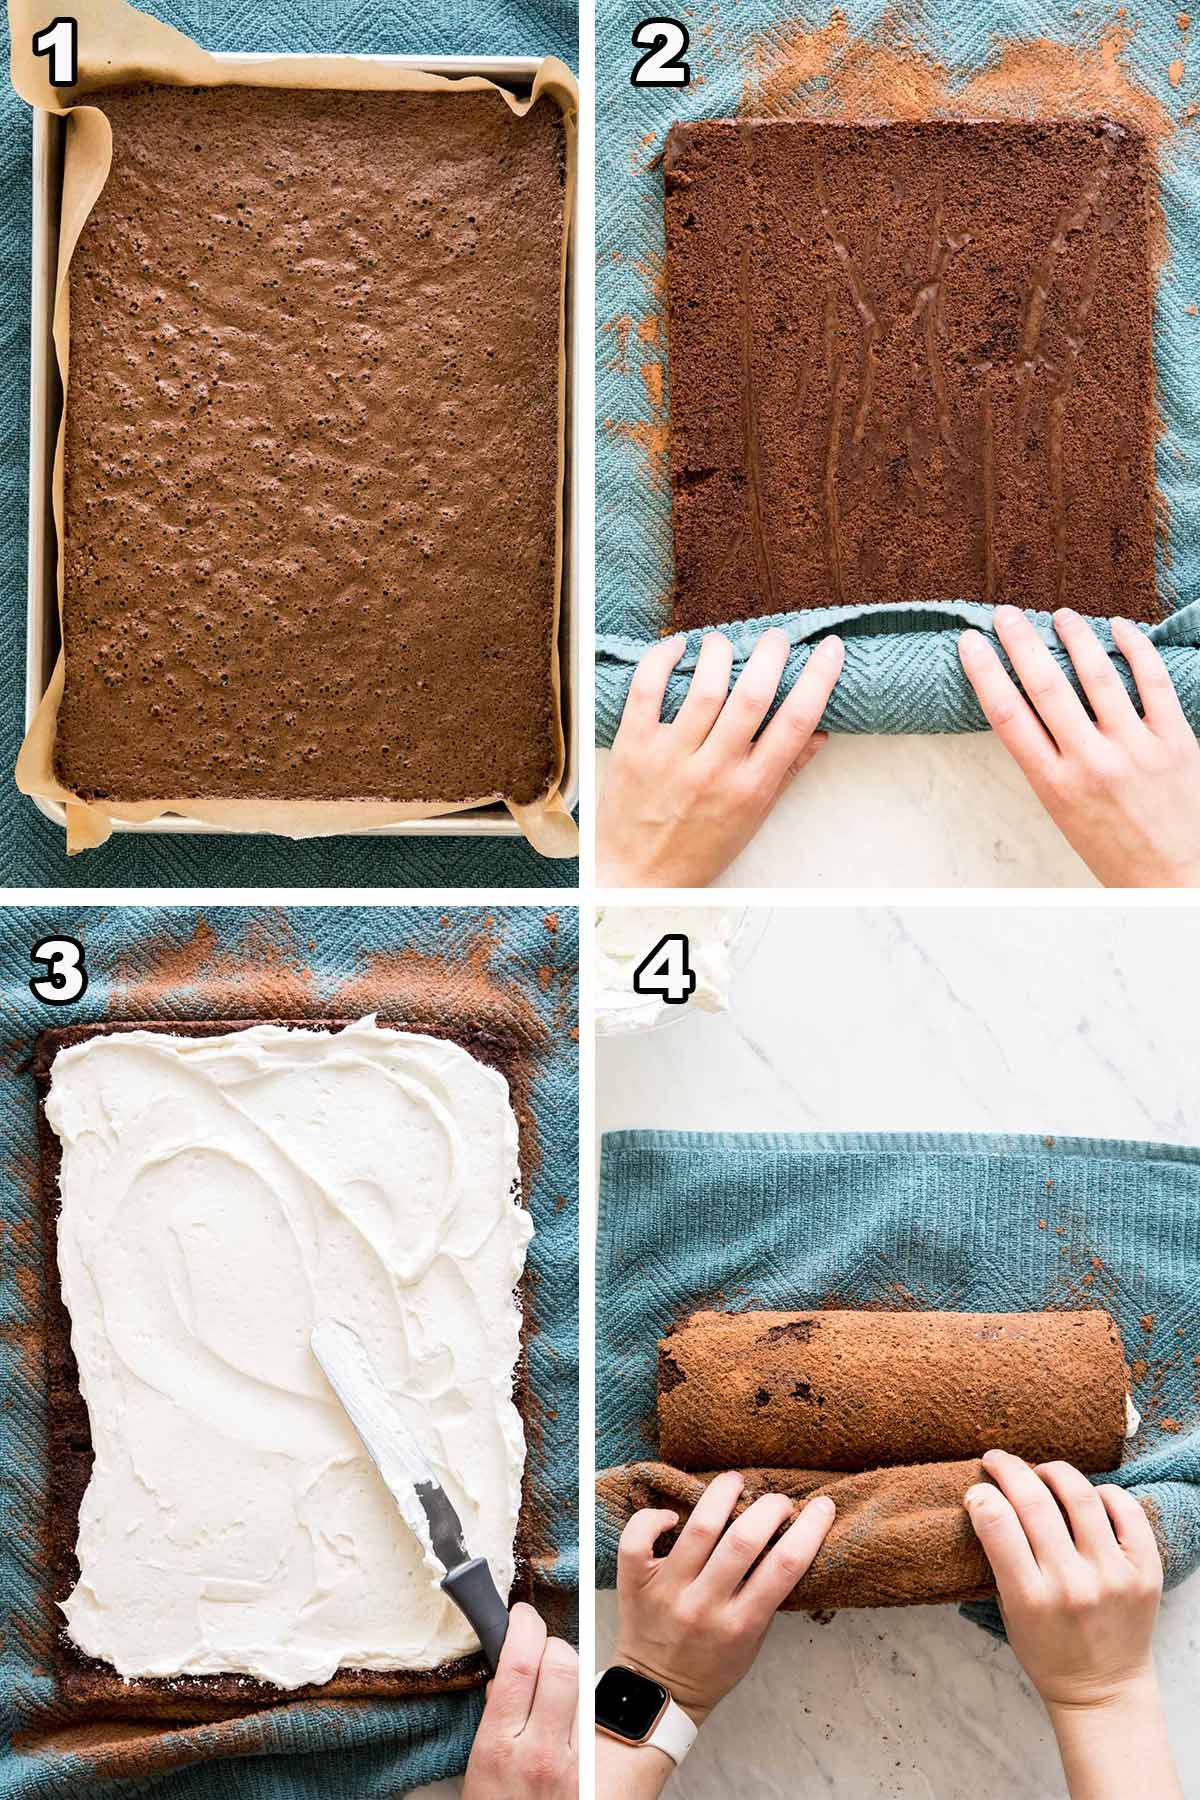 4 picture collage: 1) cake in pan 2) rolling cake 3) frosting cake 4) rolling cake again